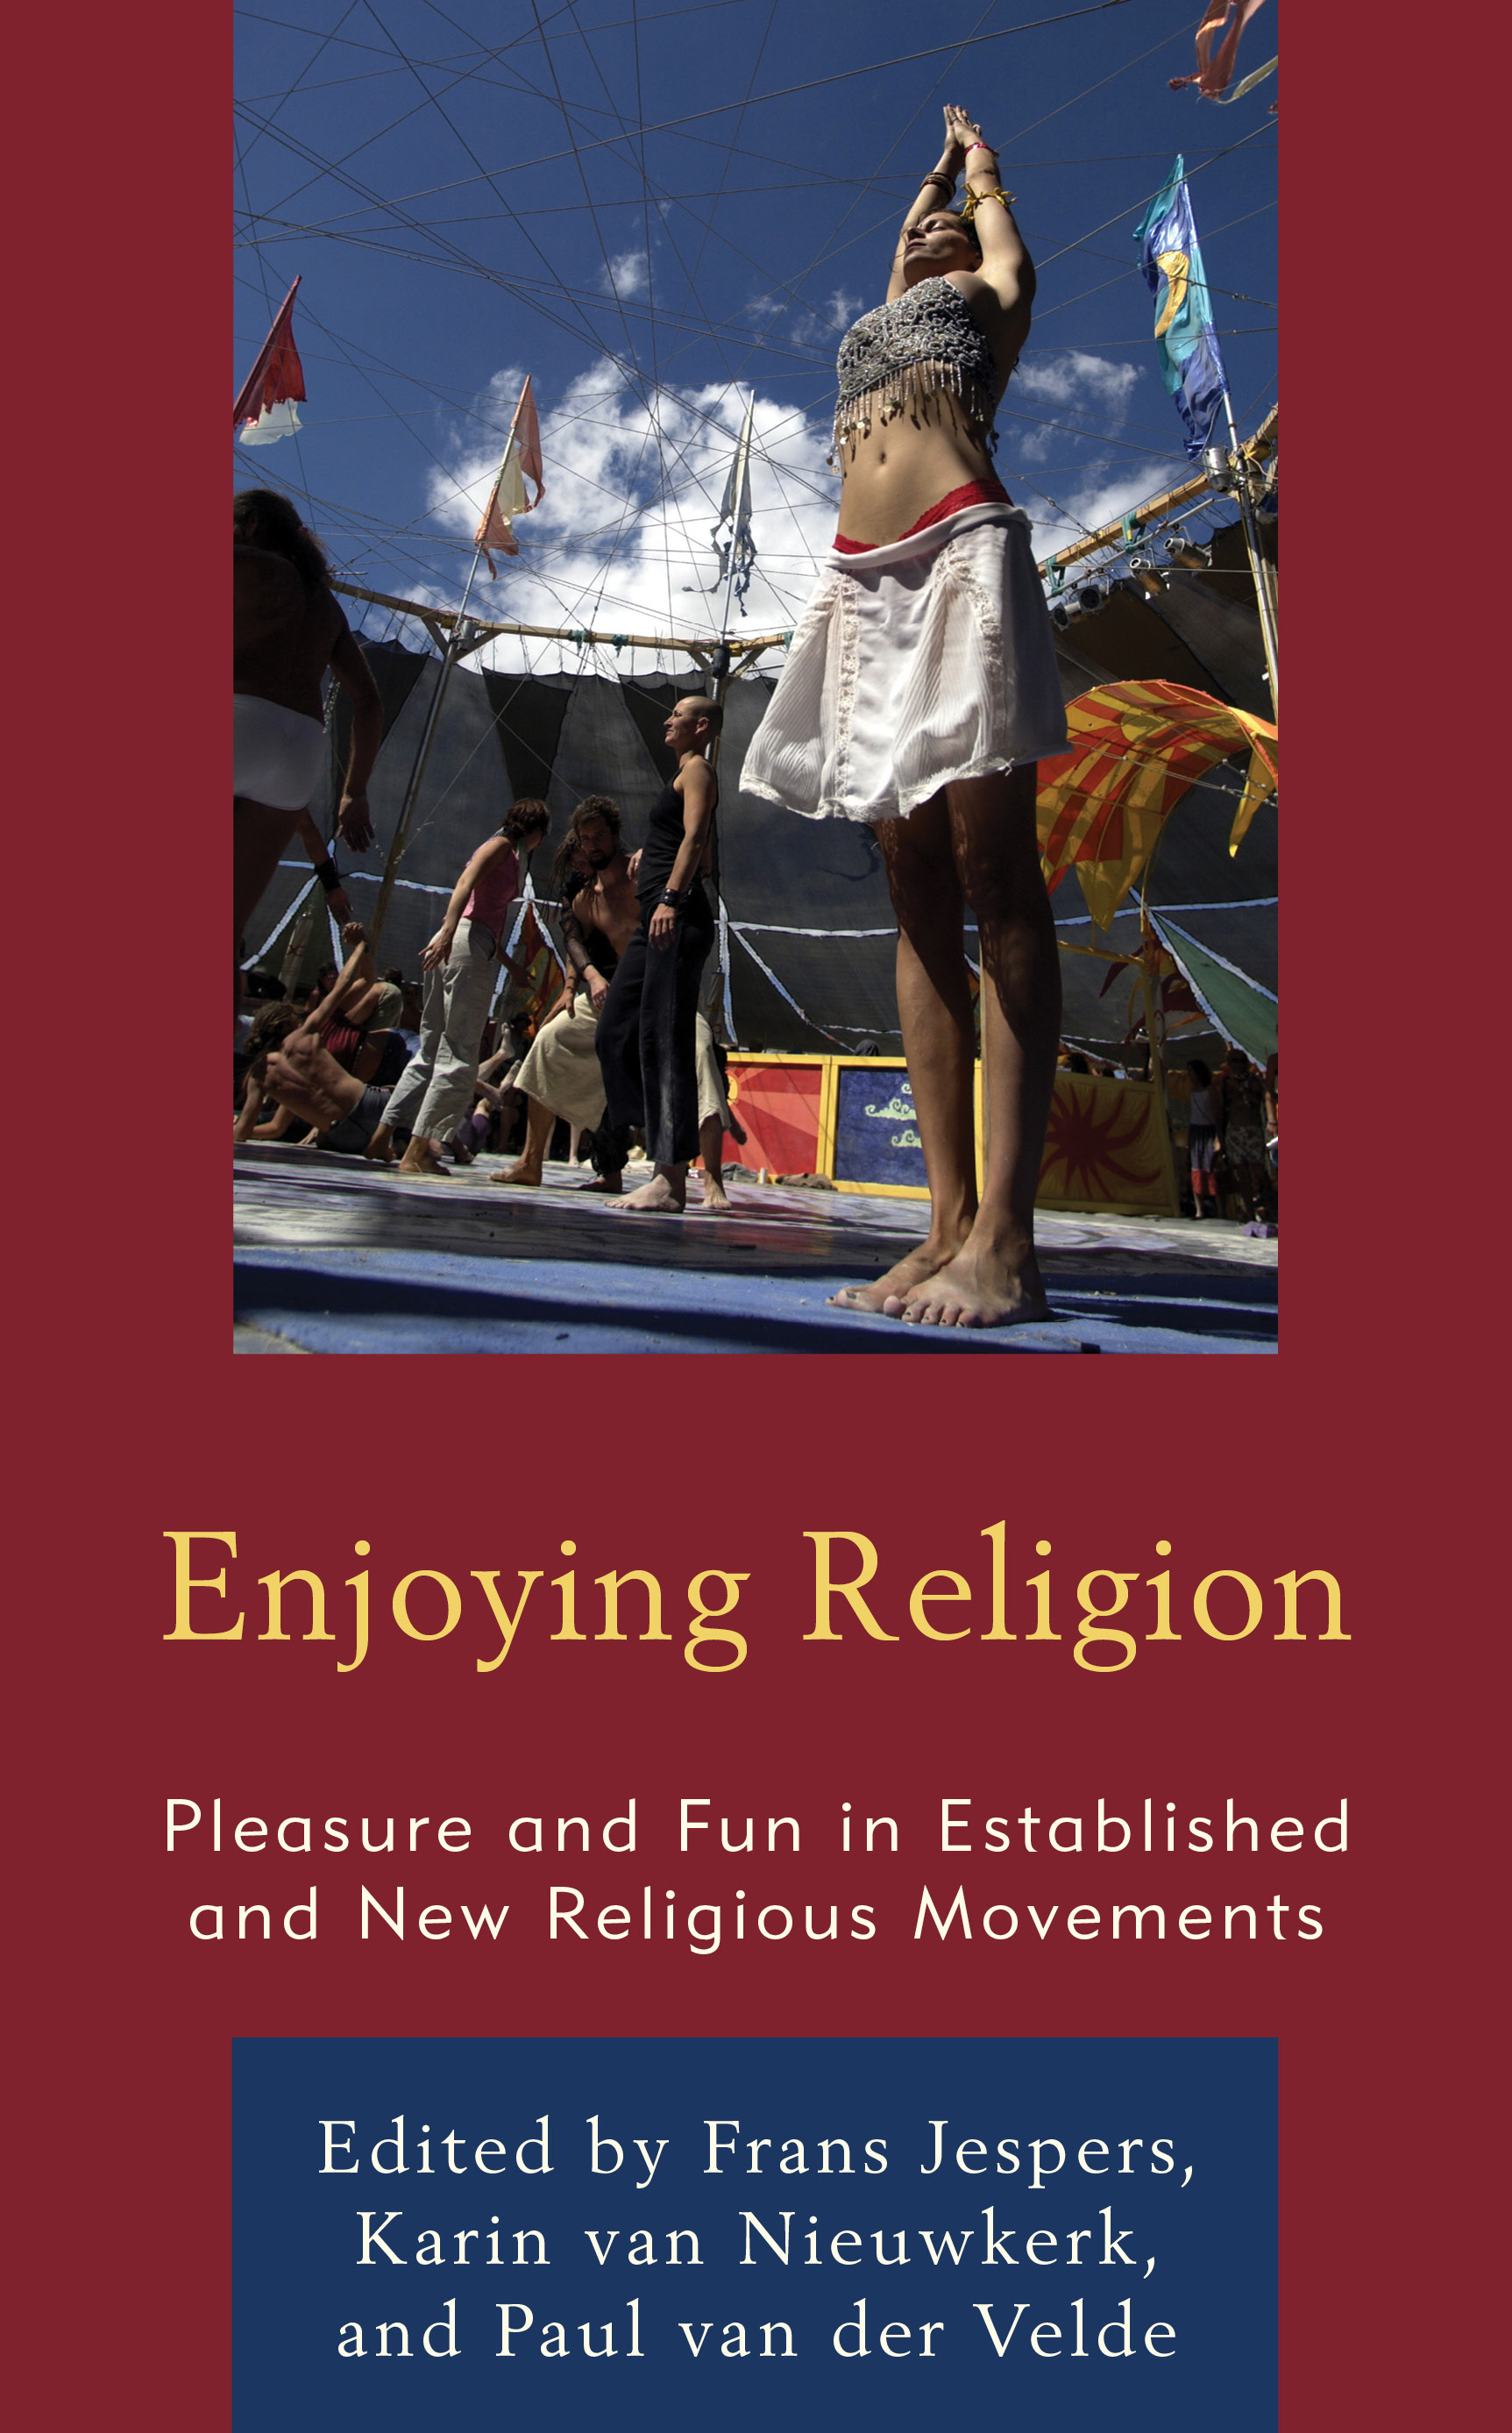 Enjoying Religion: Pleasure and Fun in Established and New Religious Movements